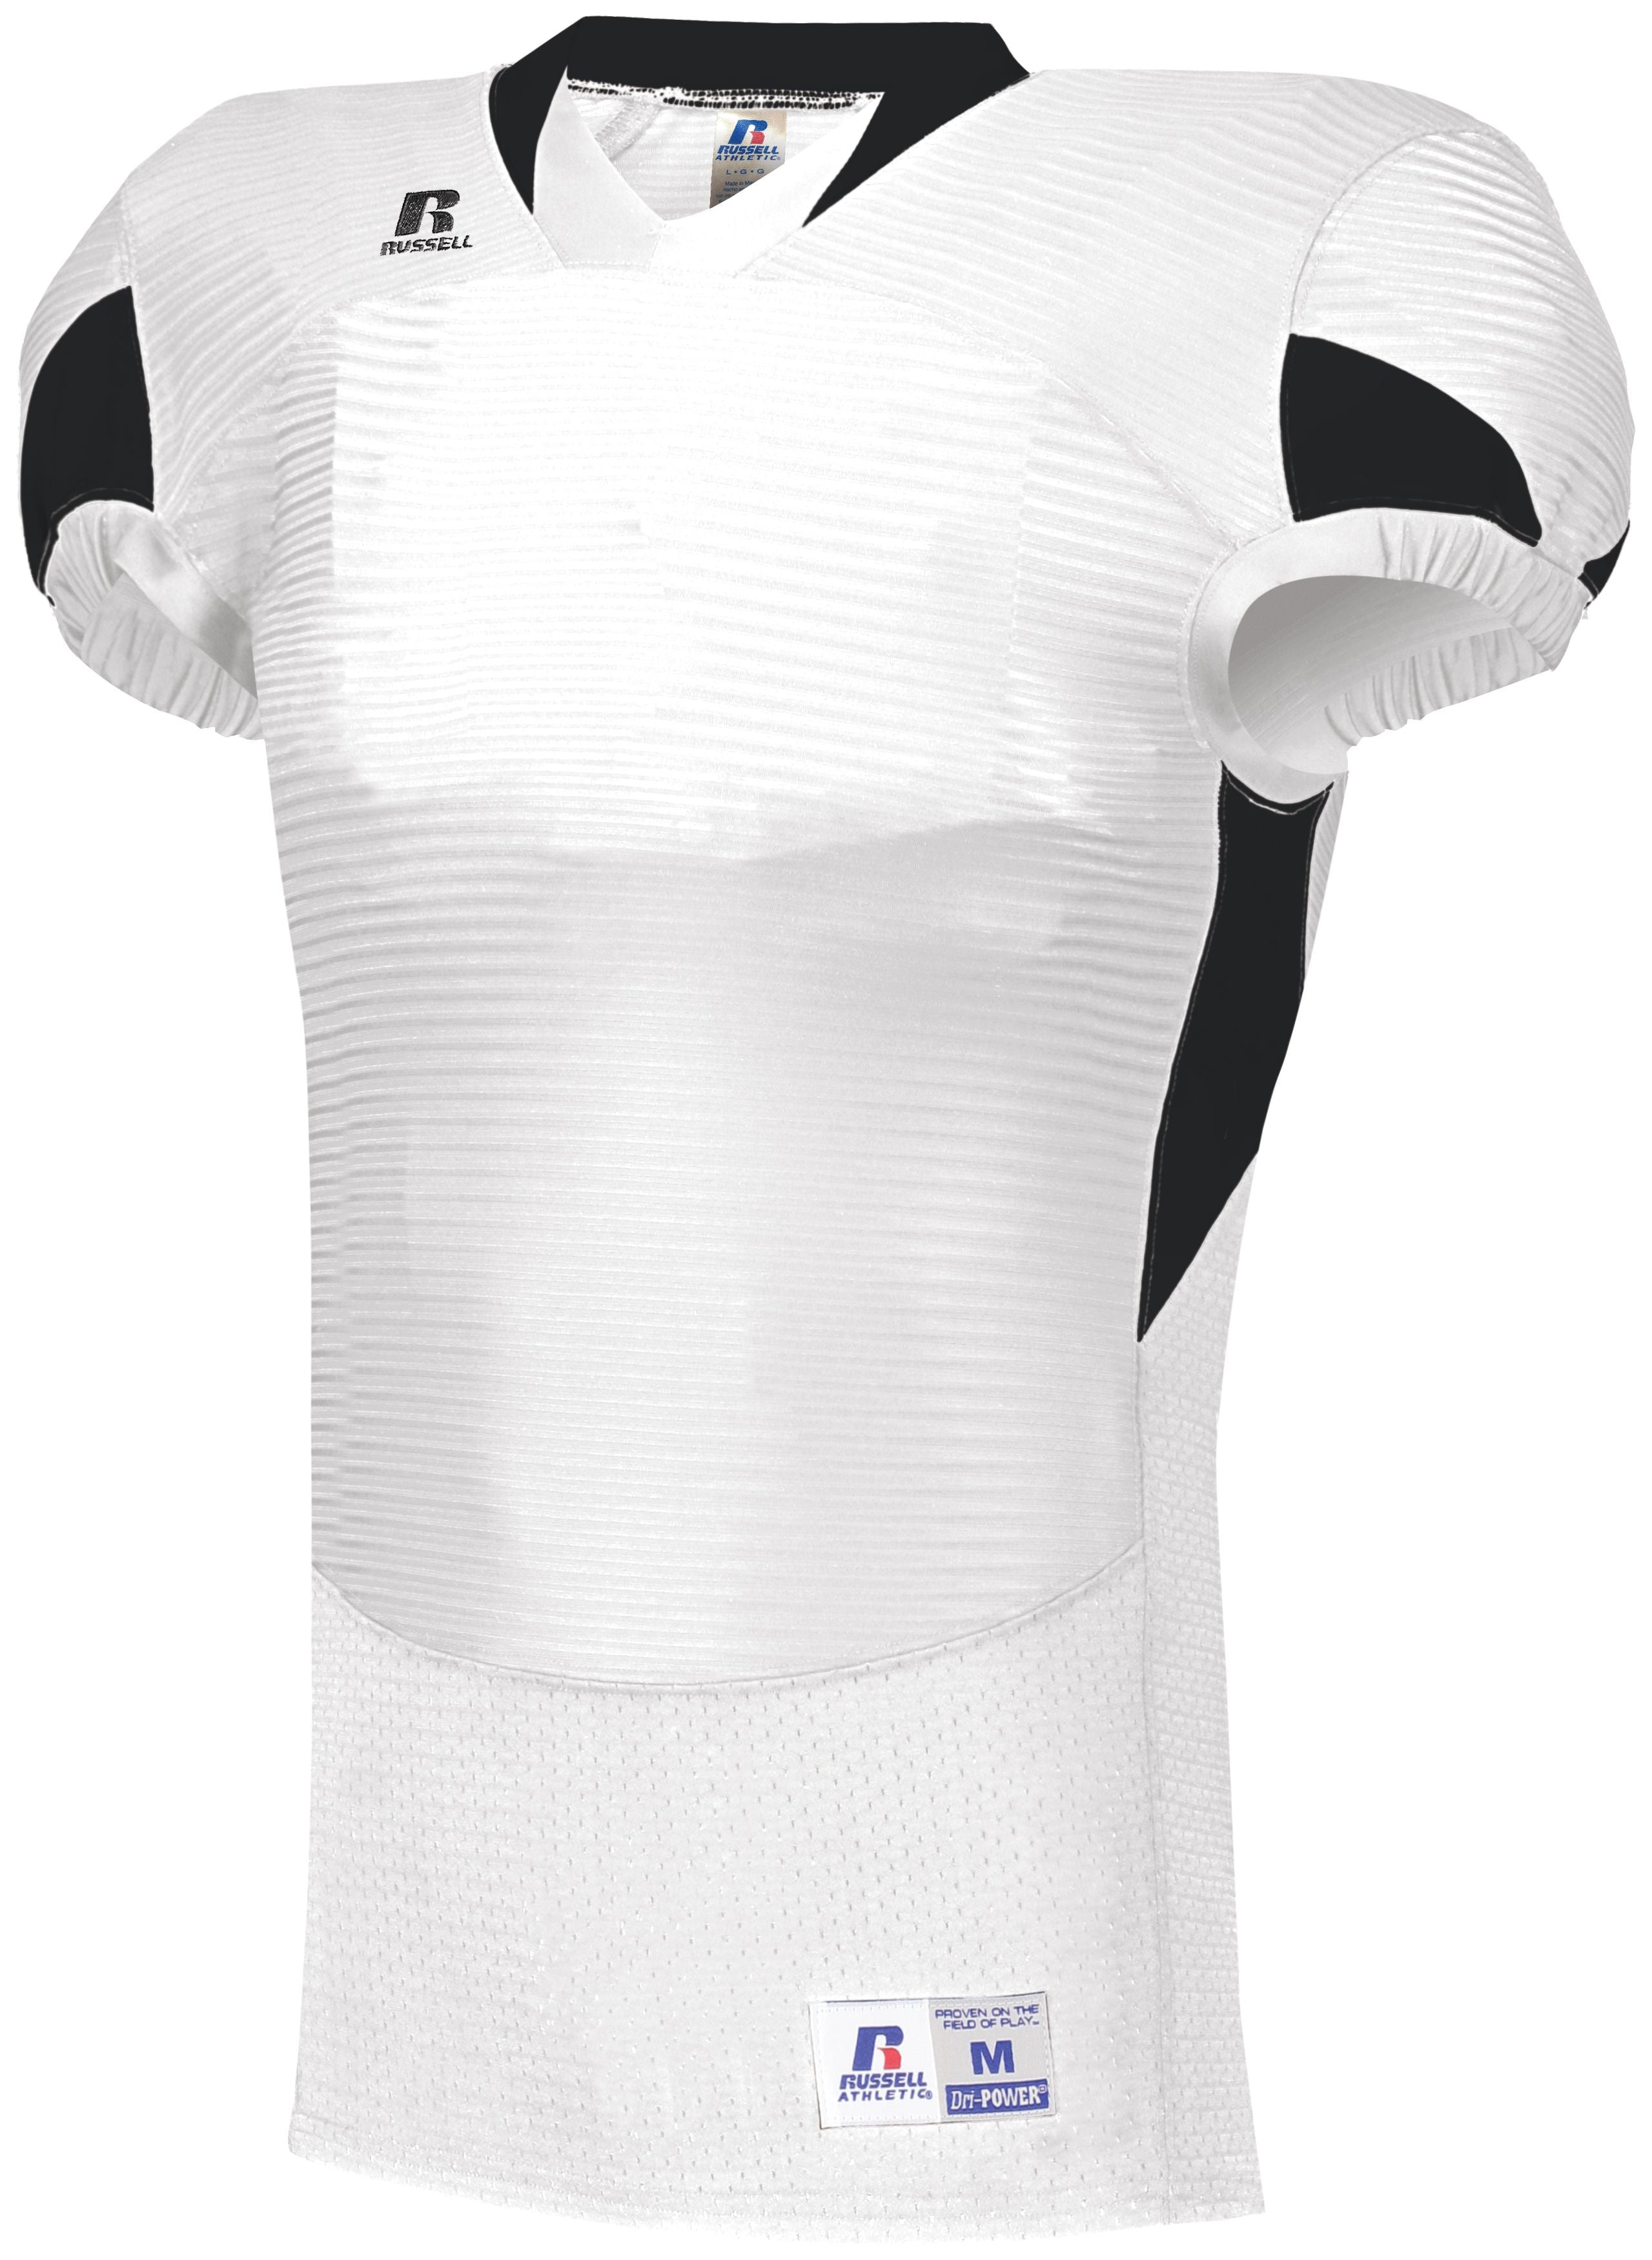 Russell Athletic Waist Length Football Jersey in White/Black  -Part of the Adult, Adult-Jersey, Football, Russell-Athletic-Products, Shirts, All-Sports, All-Sports-1 product lines at KanaleyCreations.com